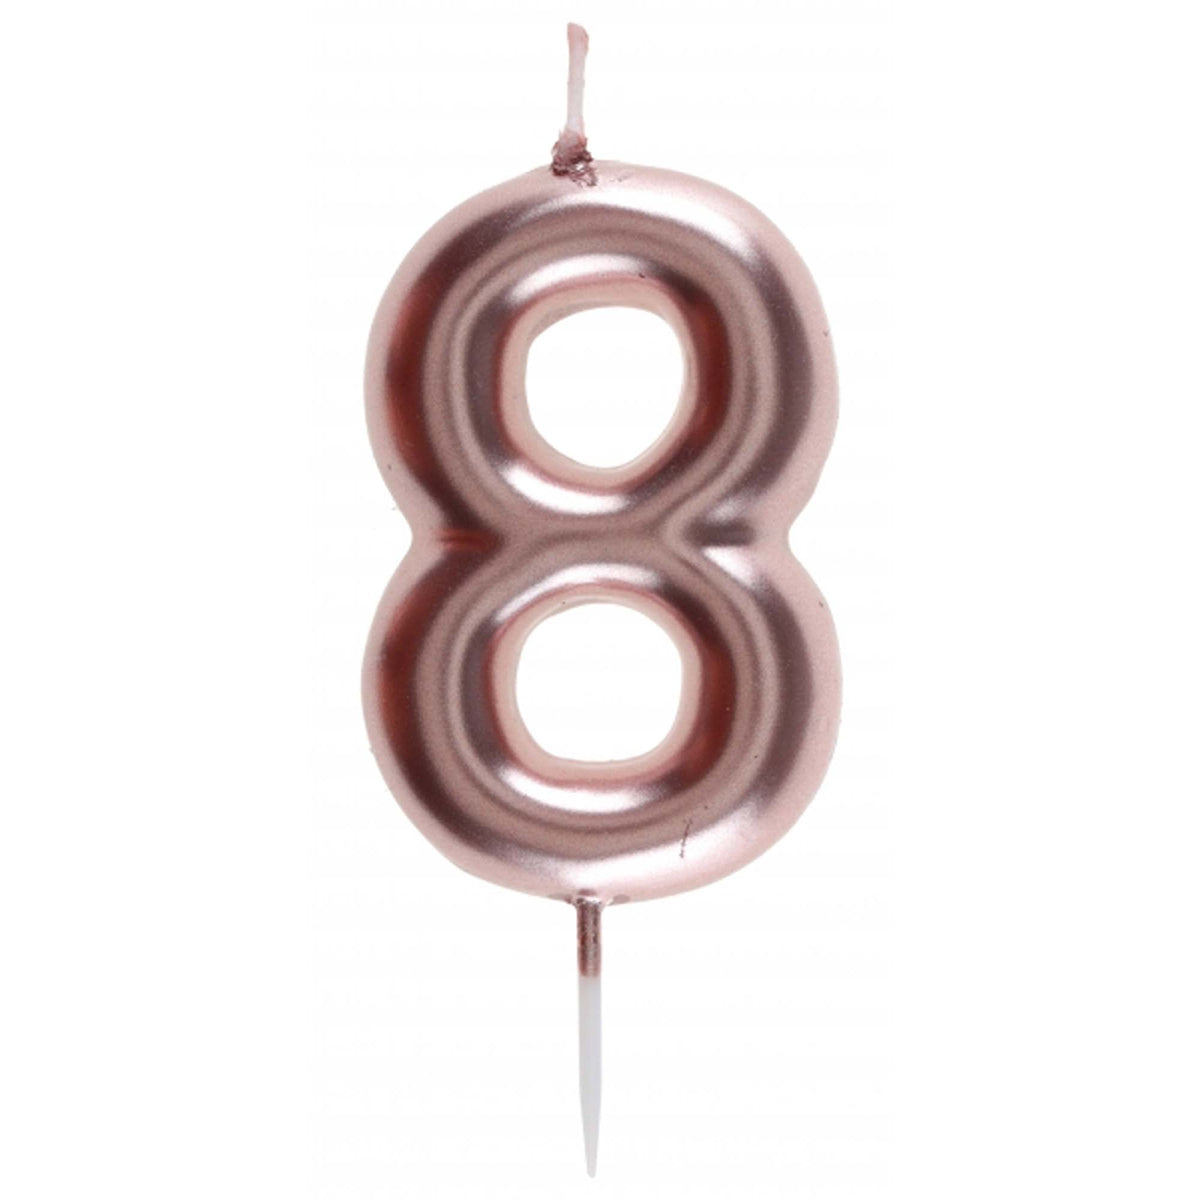 SANTEX Cake Supplies Rose Gold Number 8 Birthday Candle, 1 Count 3660380068853